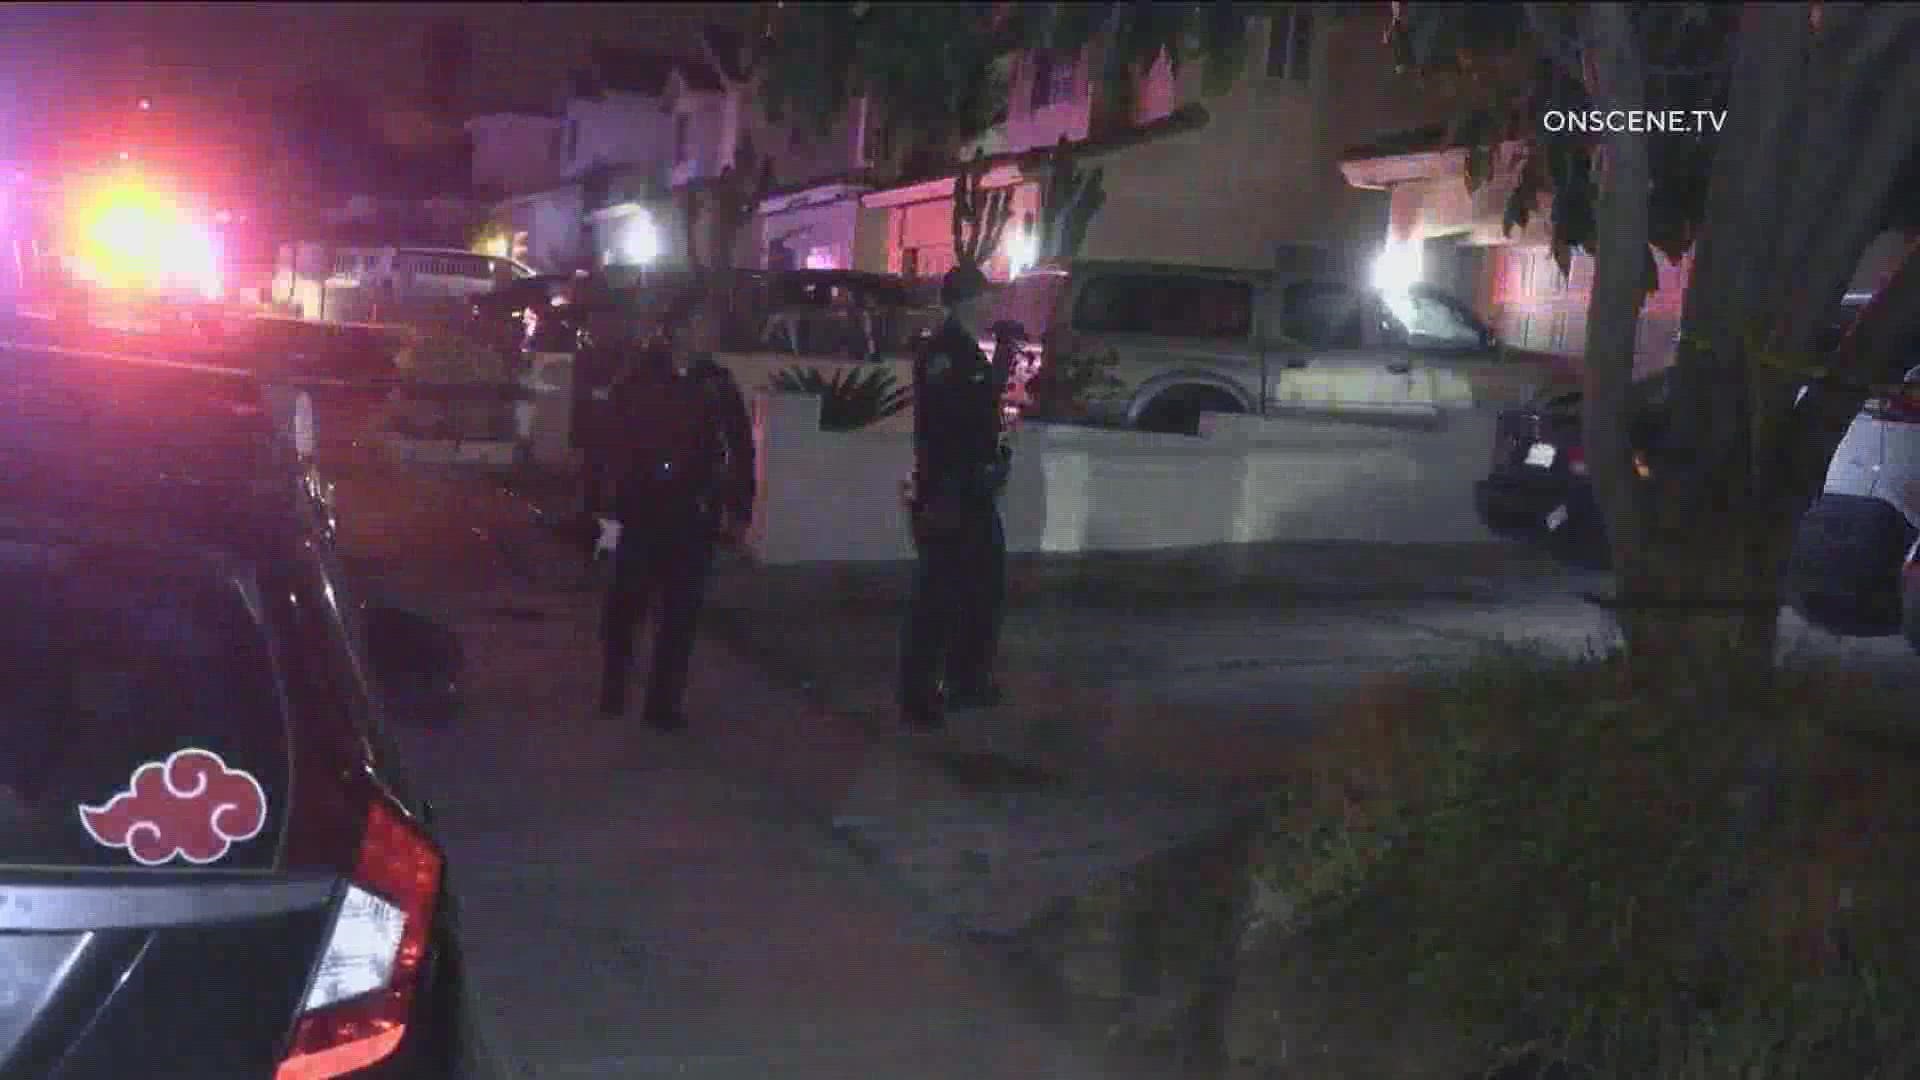 A 20-year-old male has died and two teenagers were taken to the hospital with non-life-threatening gun shot wounds.